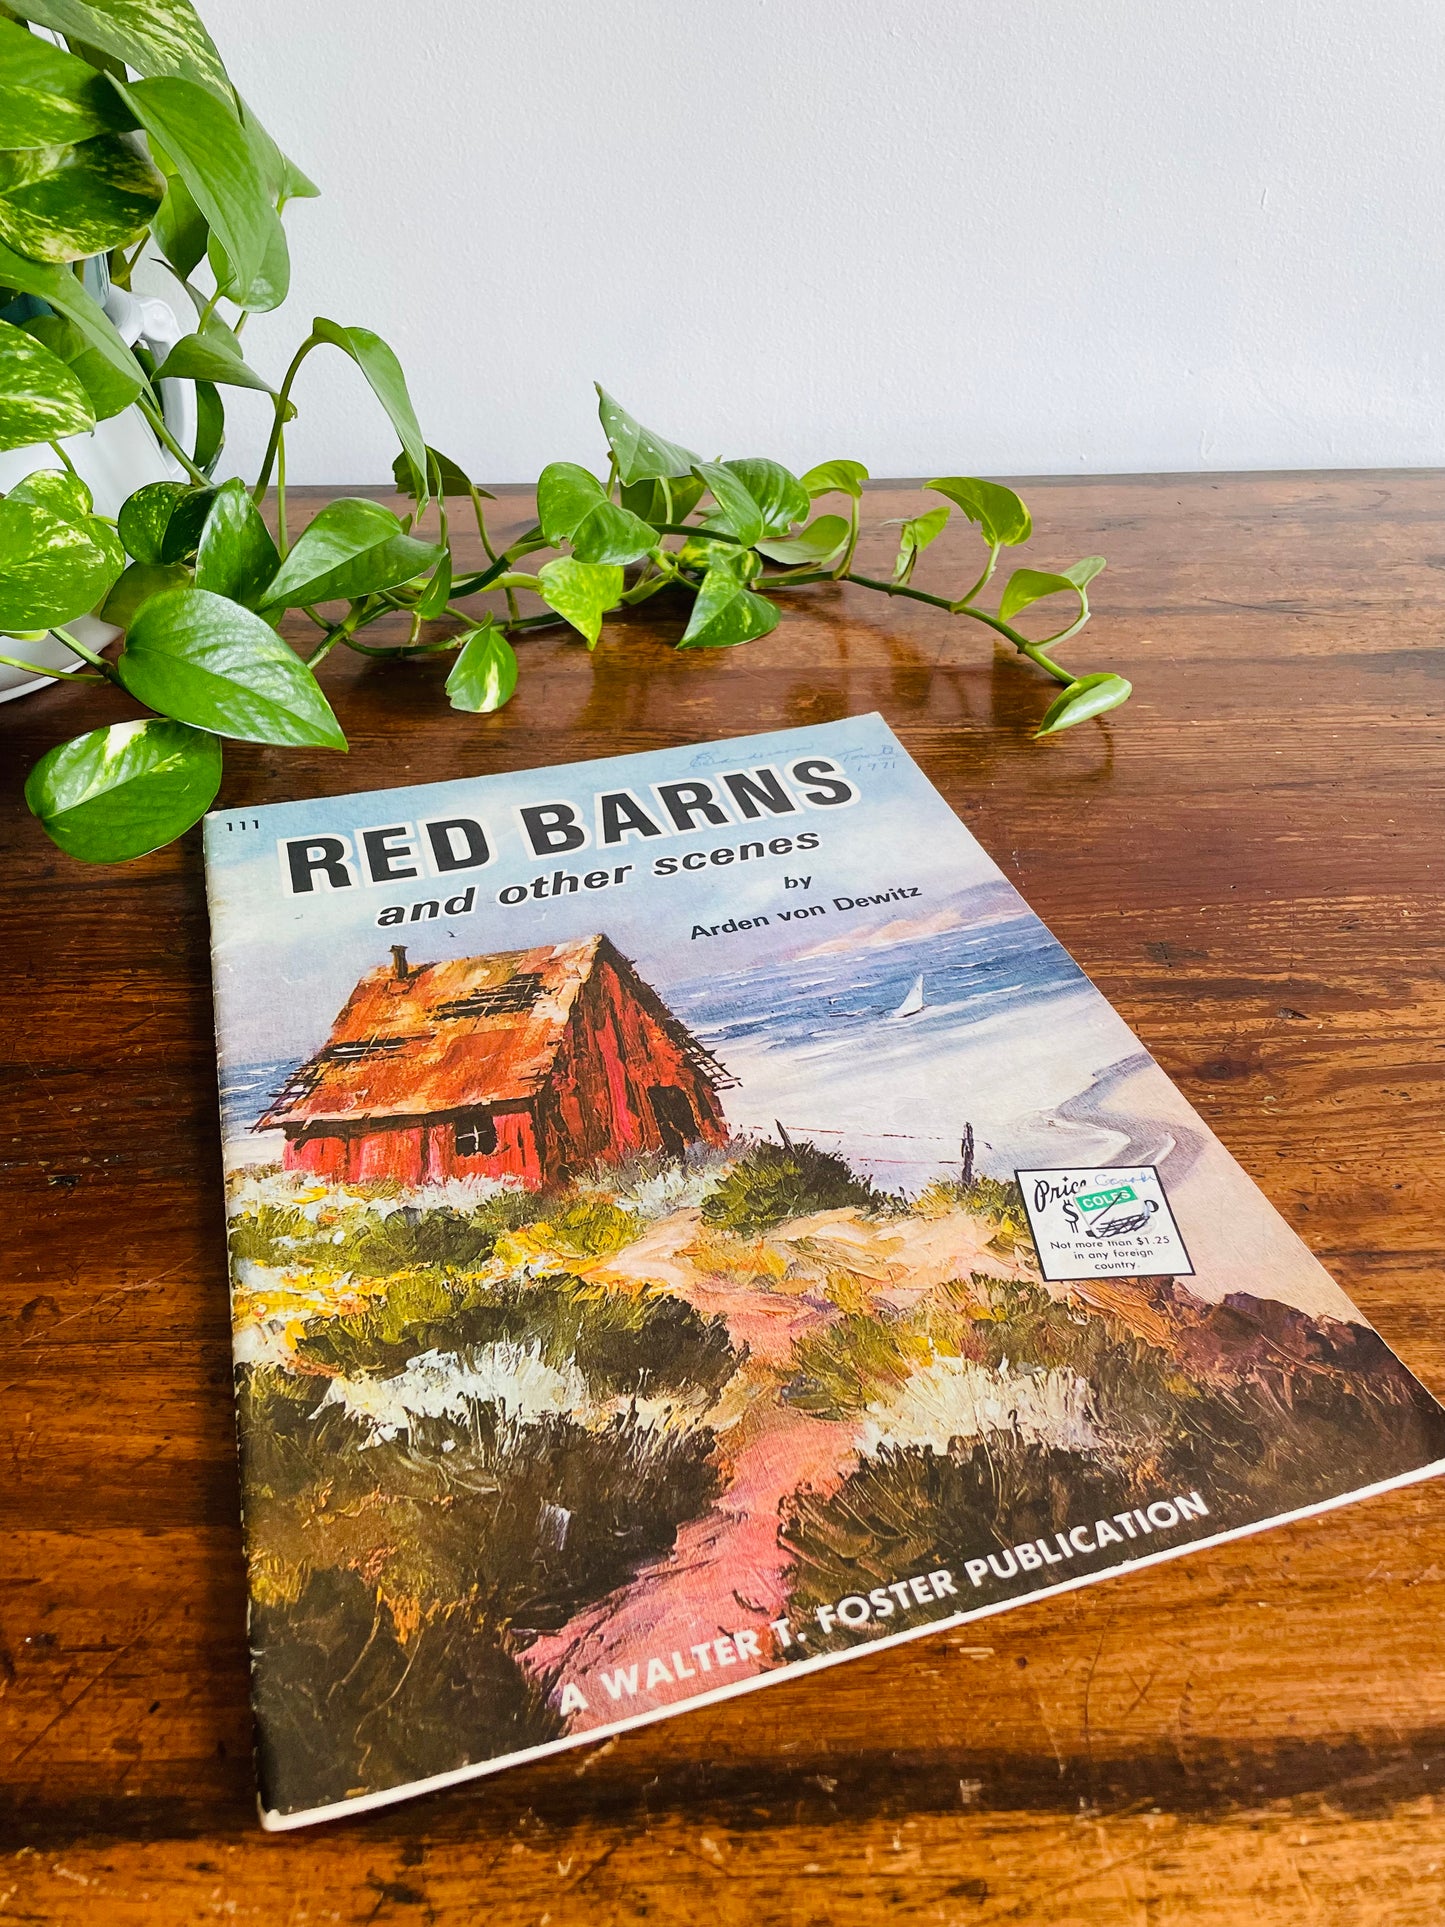 Walter T. Foster Art Book #111 - Red Barns and Other Scenes